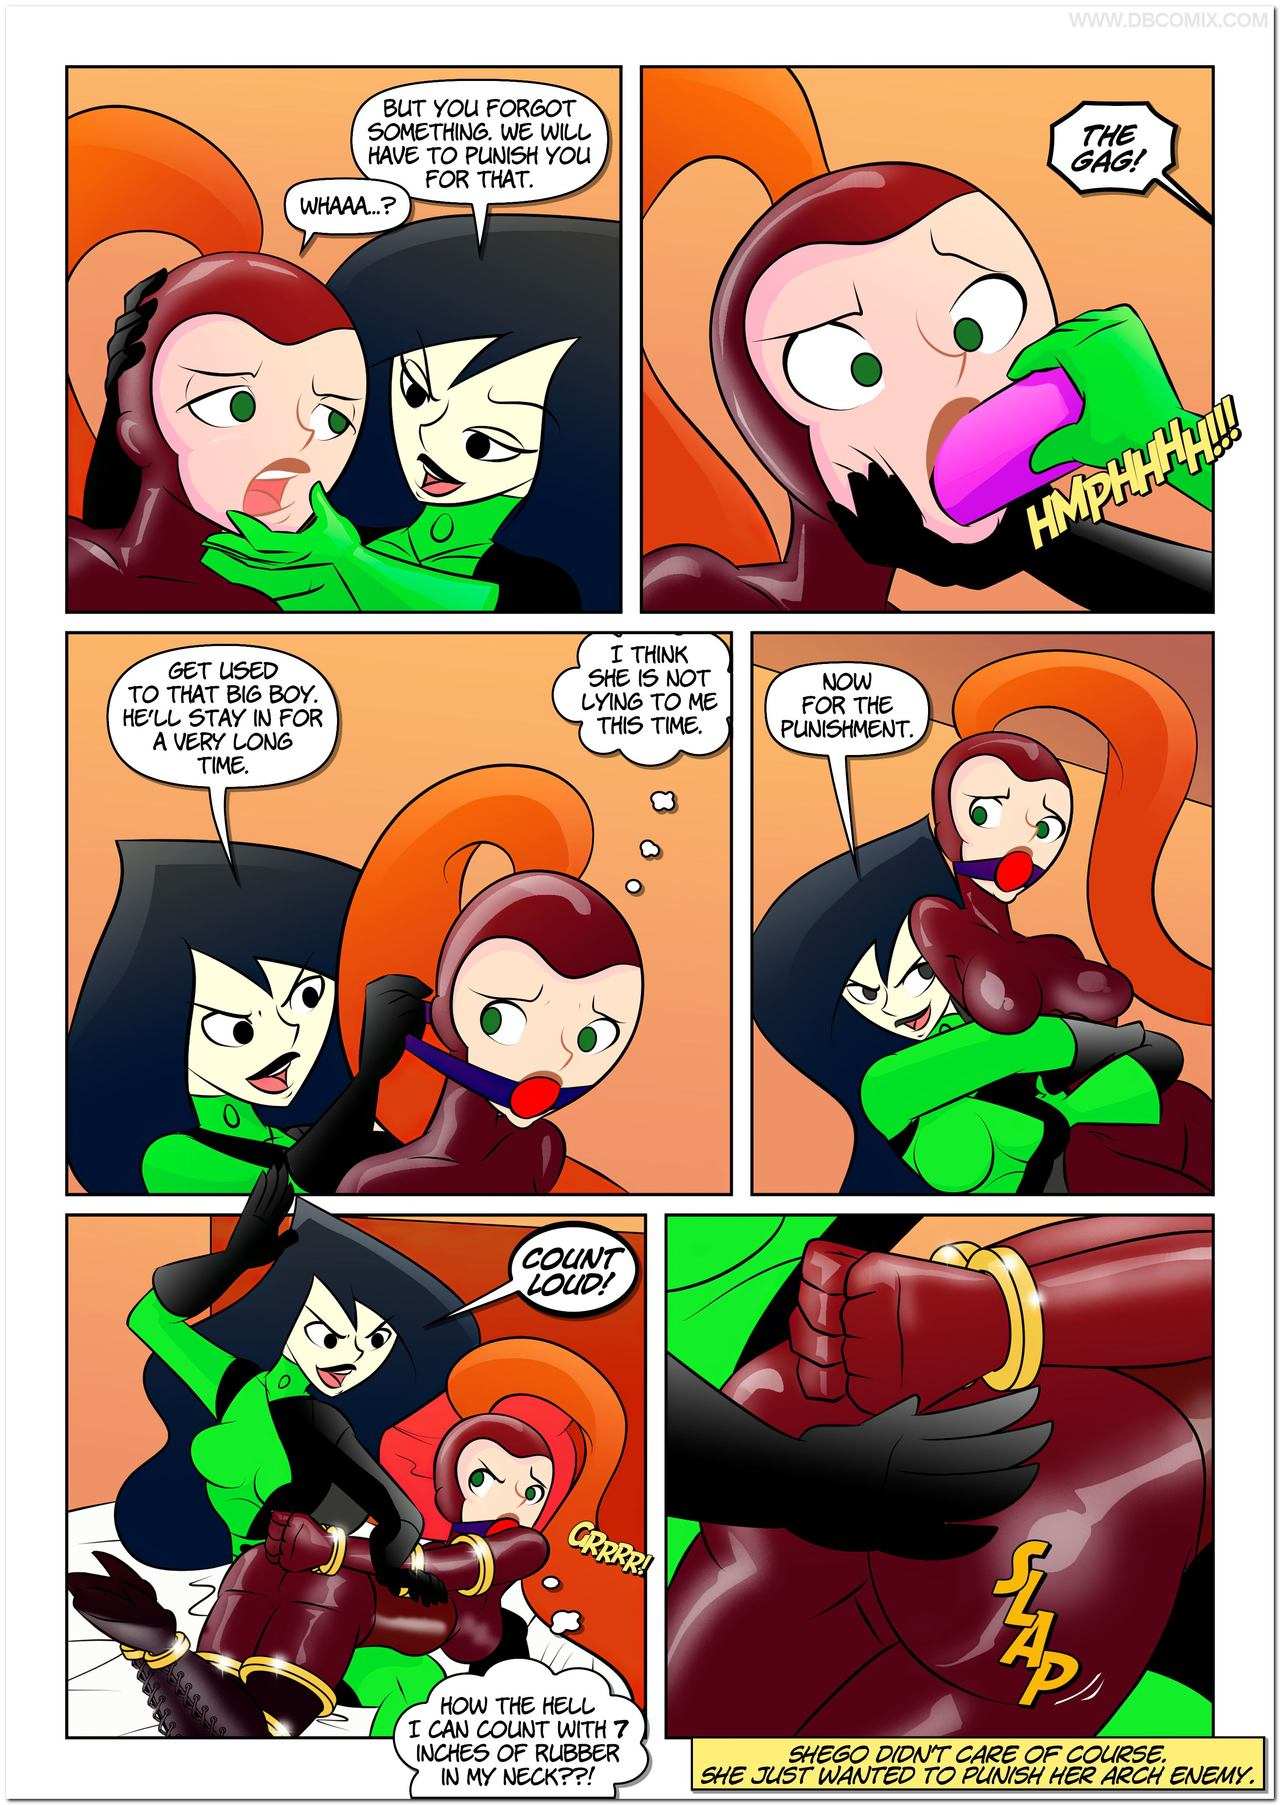 Kim Possible - Impossibly Obscene 5 - Returning The Favor â€“ DBComix -  Comics Army